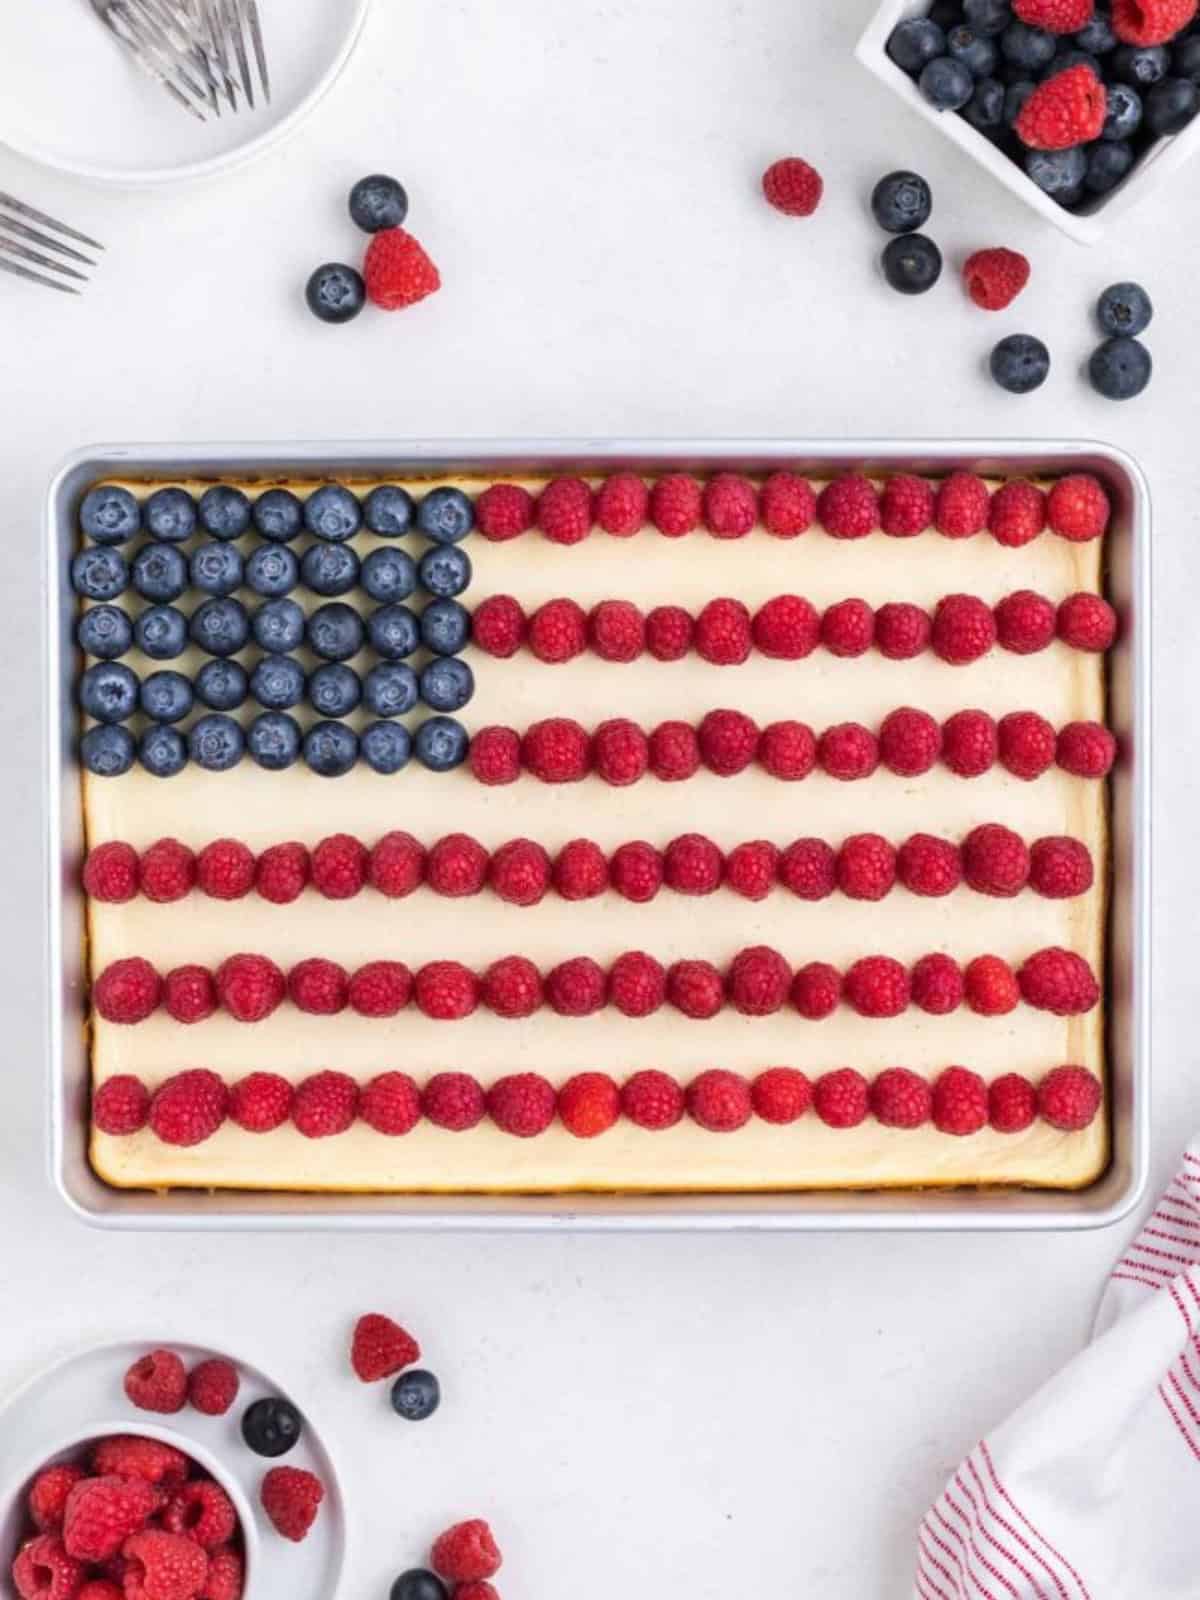 American flag themed red white and blue bars topped with raspberries and blueberries.